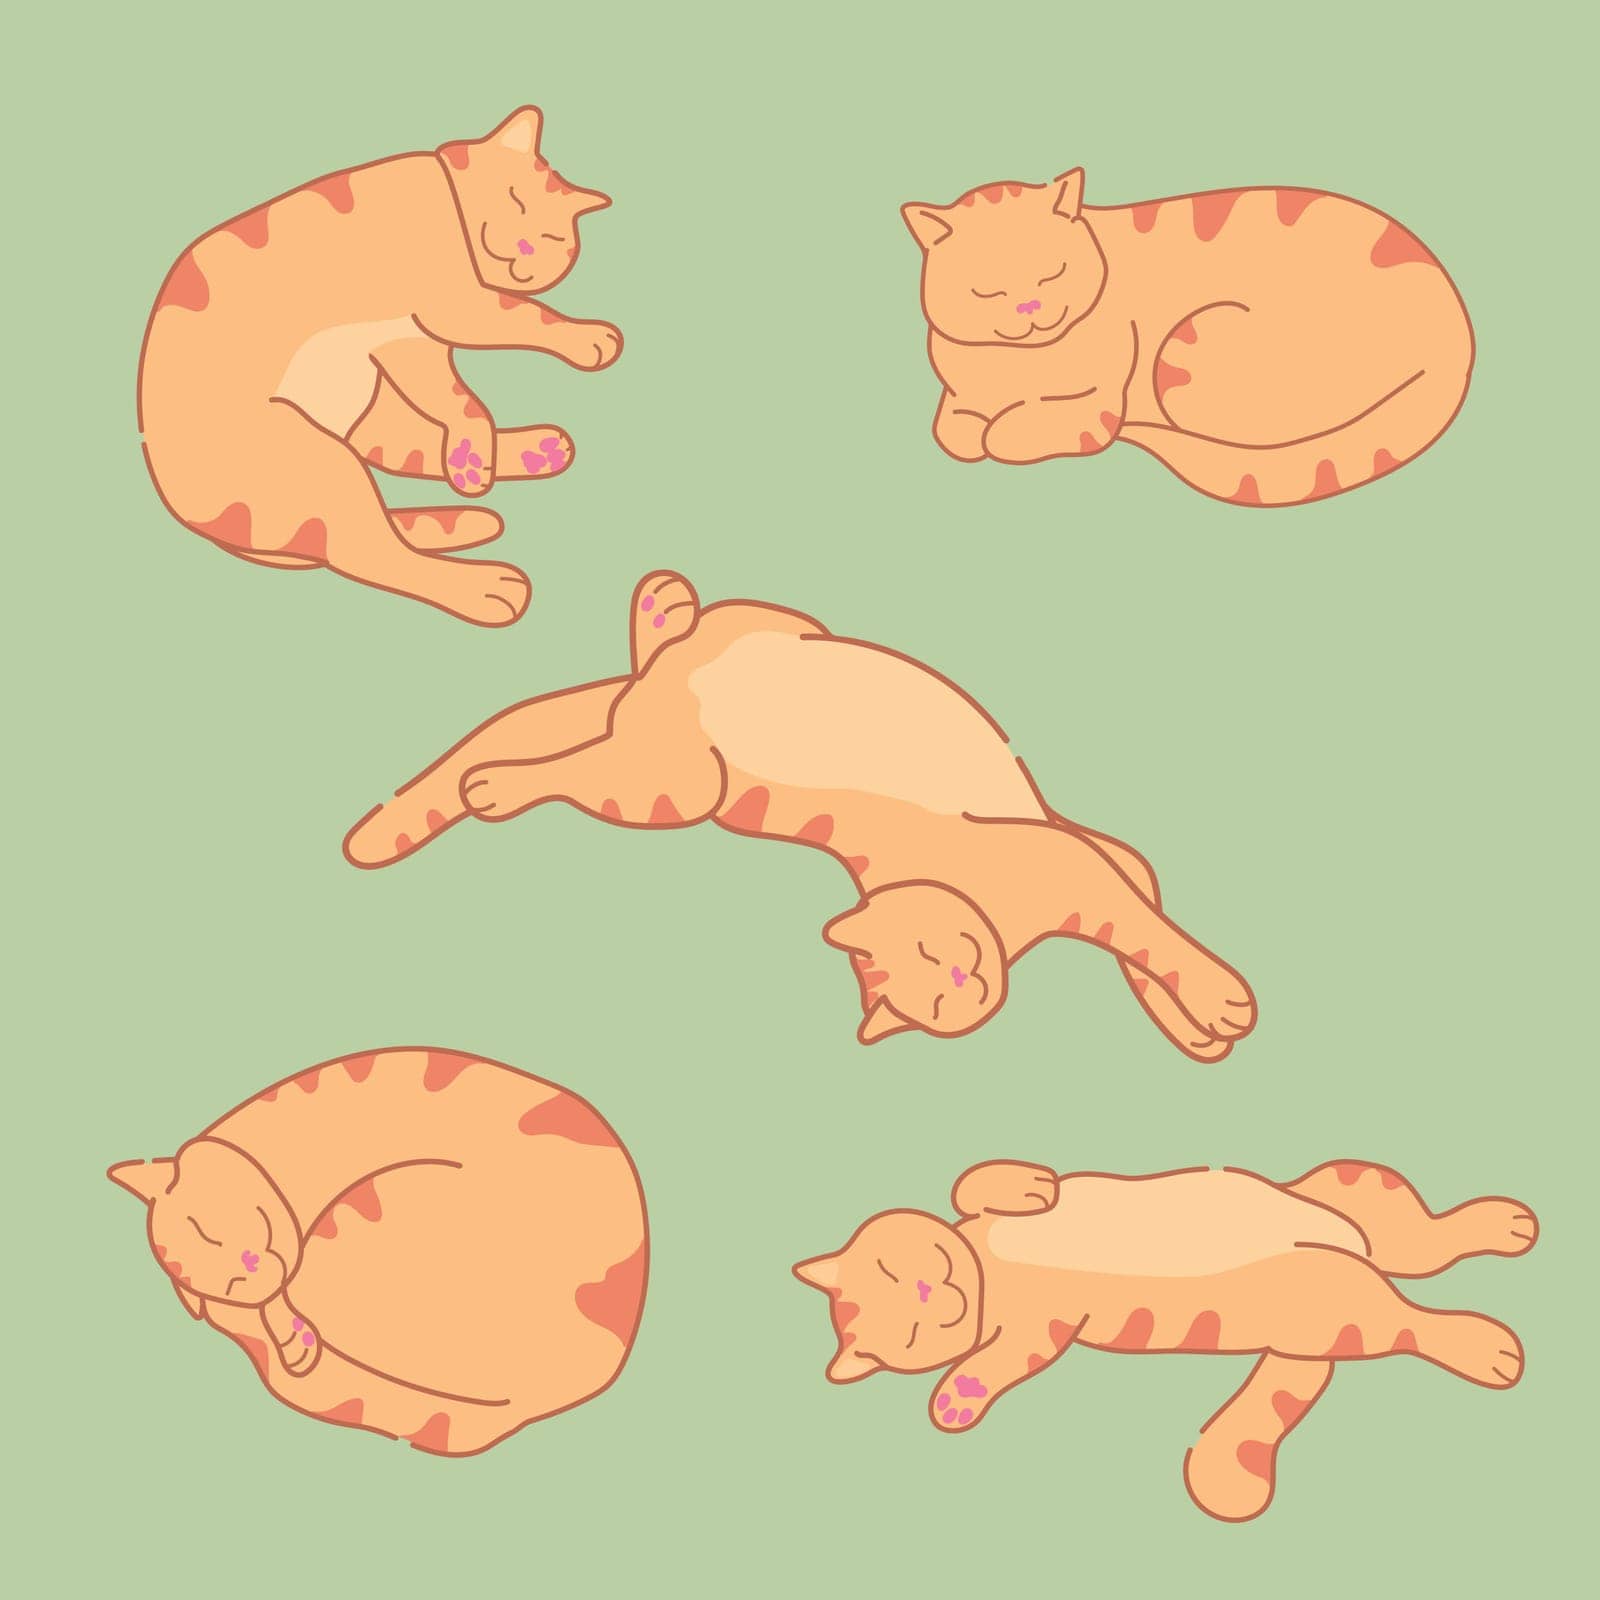 Sleeping ginger cat in different positions. Cute red tabby cat sleeps. Sleepy cat set. Vector illustration by psychoche